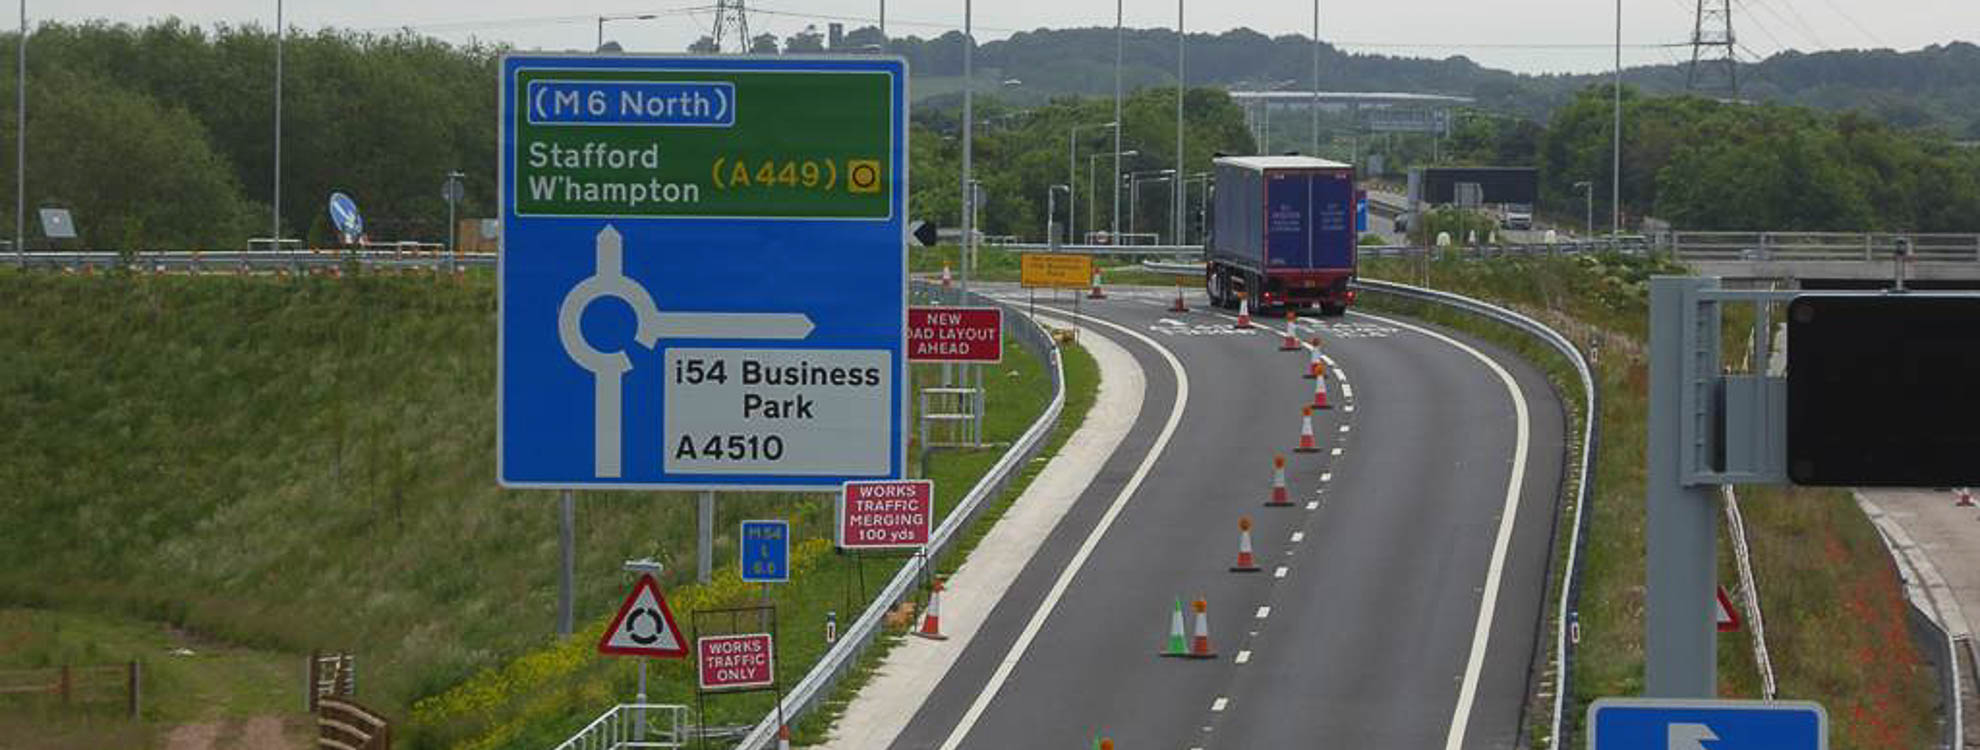 Temporary traffic management on a motorway where cones are being used to shut off one lane.